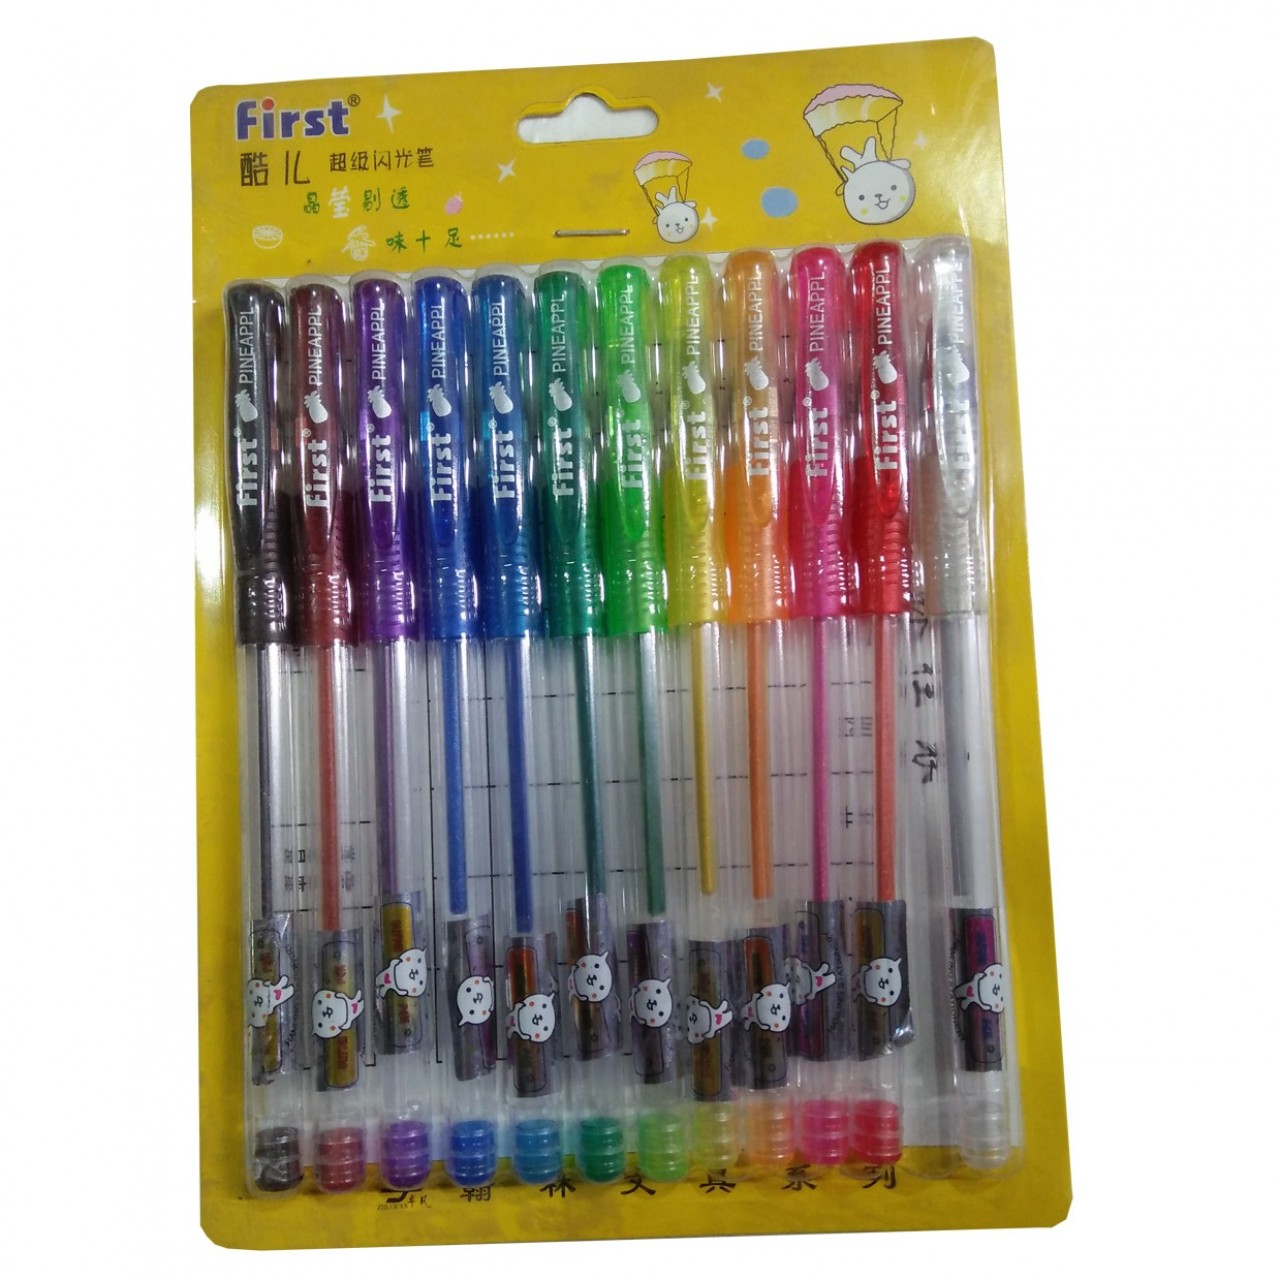 First Gel Ball Point For Kids - Pack of 12